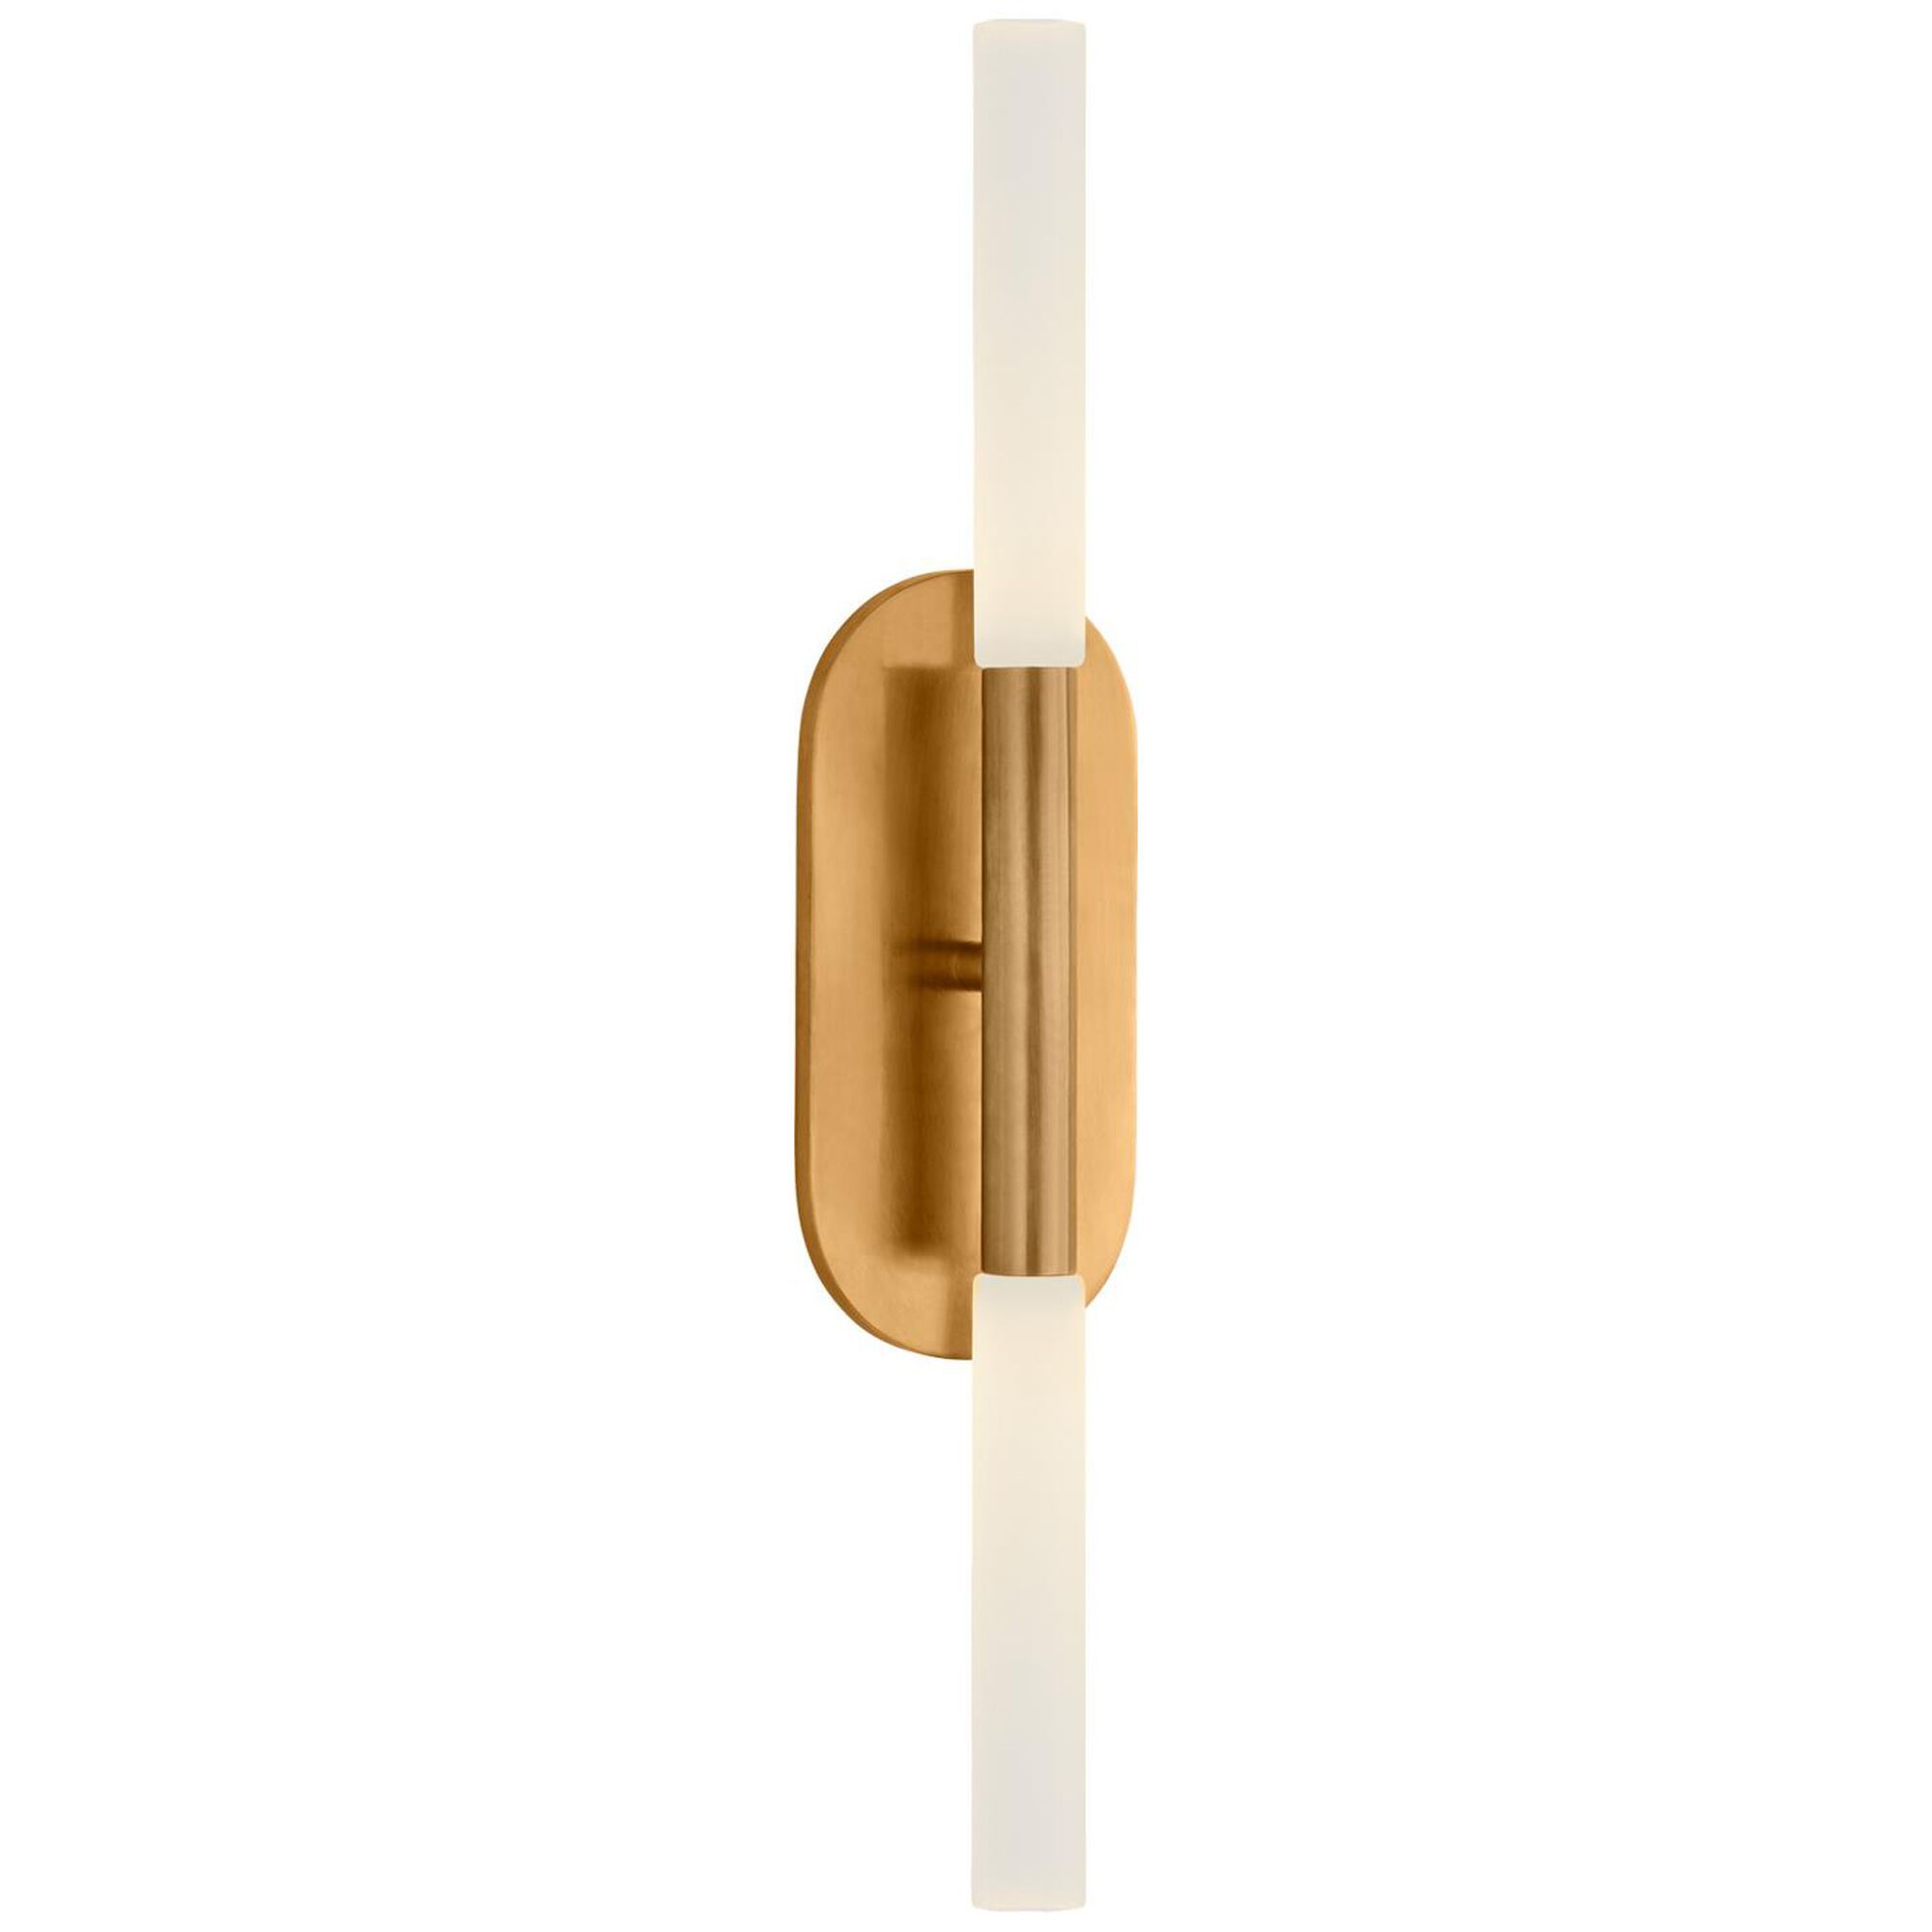 Kelly Wearstler Rousseau 22 Inch LED Bath Vanity Light by Visual Comfort and Co. | Capitol Lighting 1800lighting.com